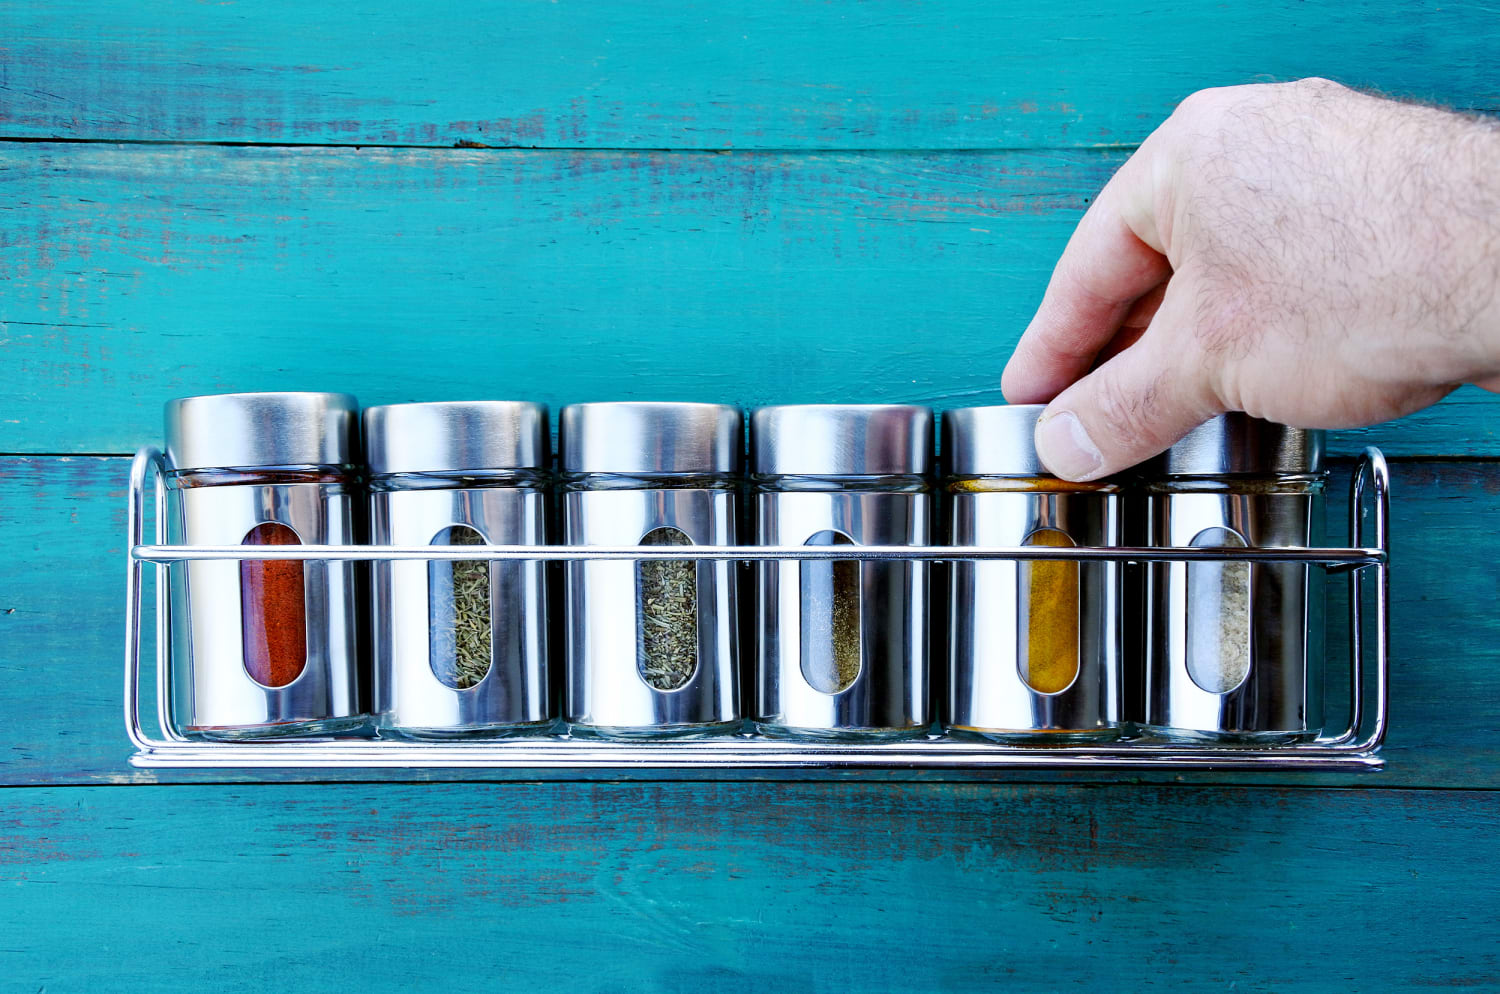 Your Spice Jars Are the Dirtiest Part of Your Kitchen, Research Shows